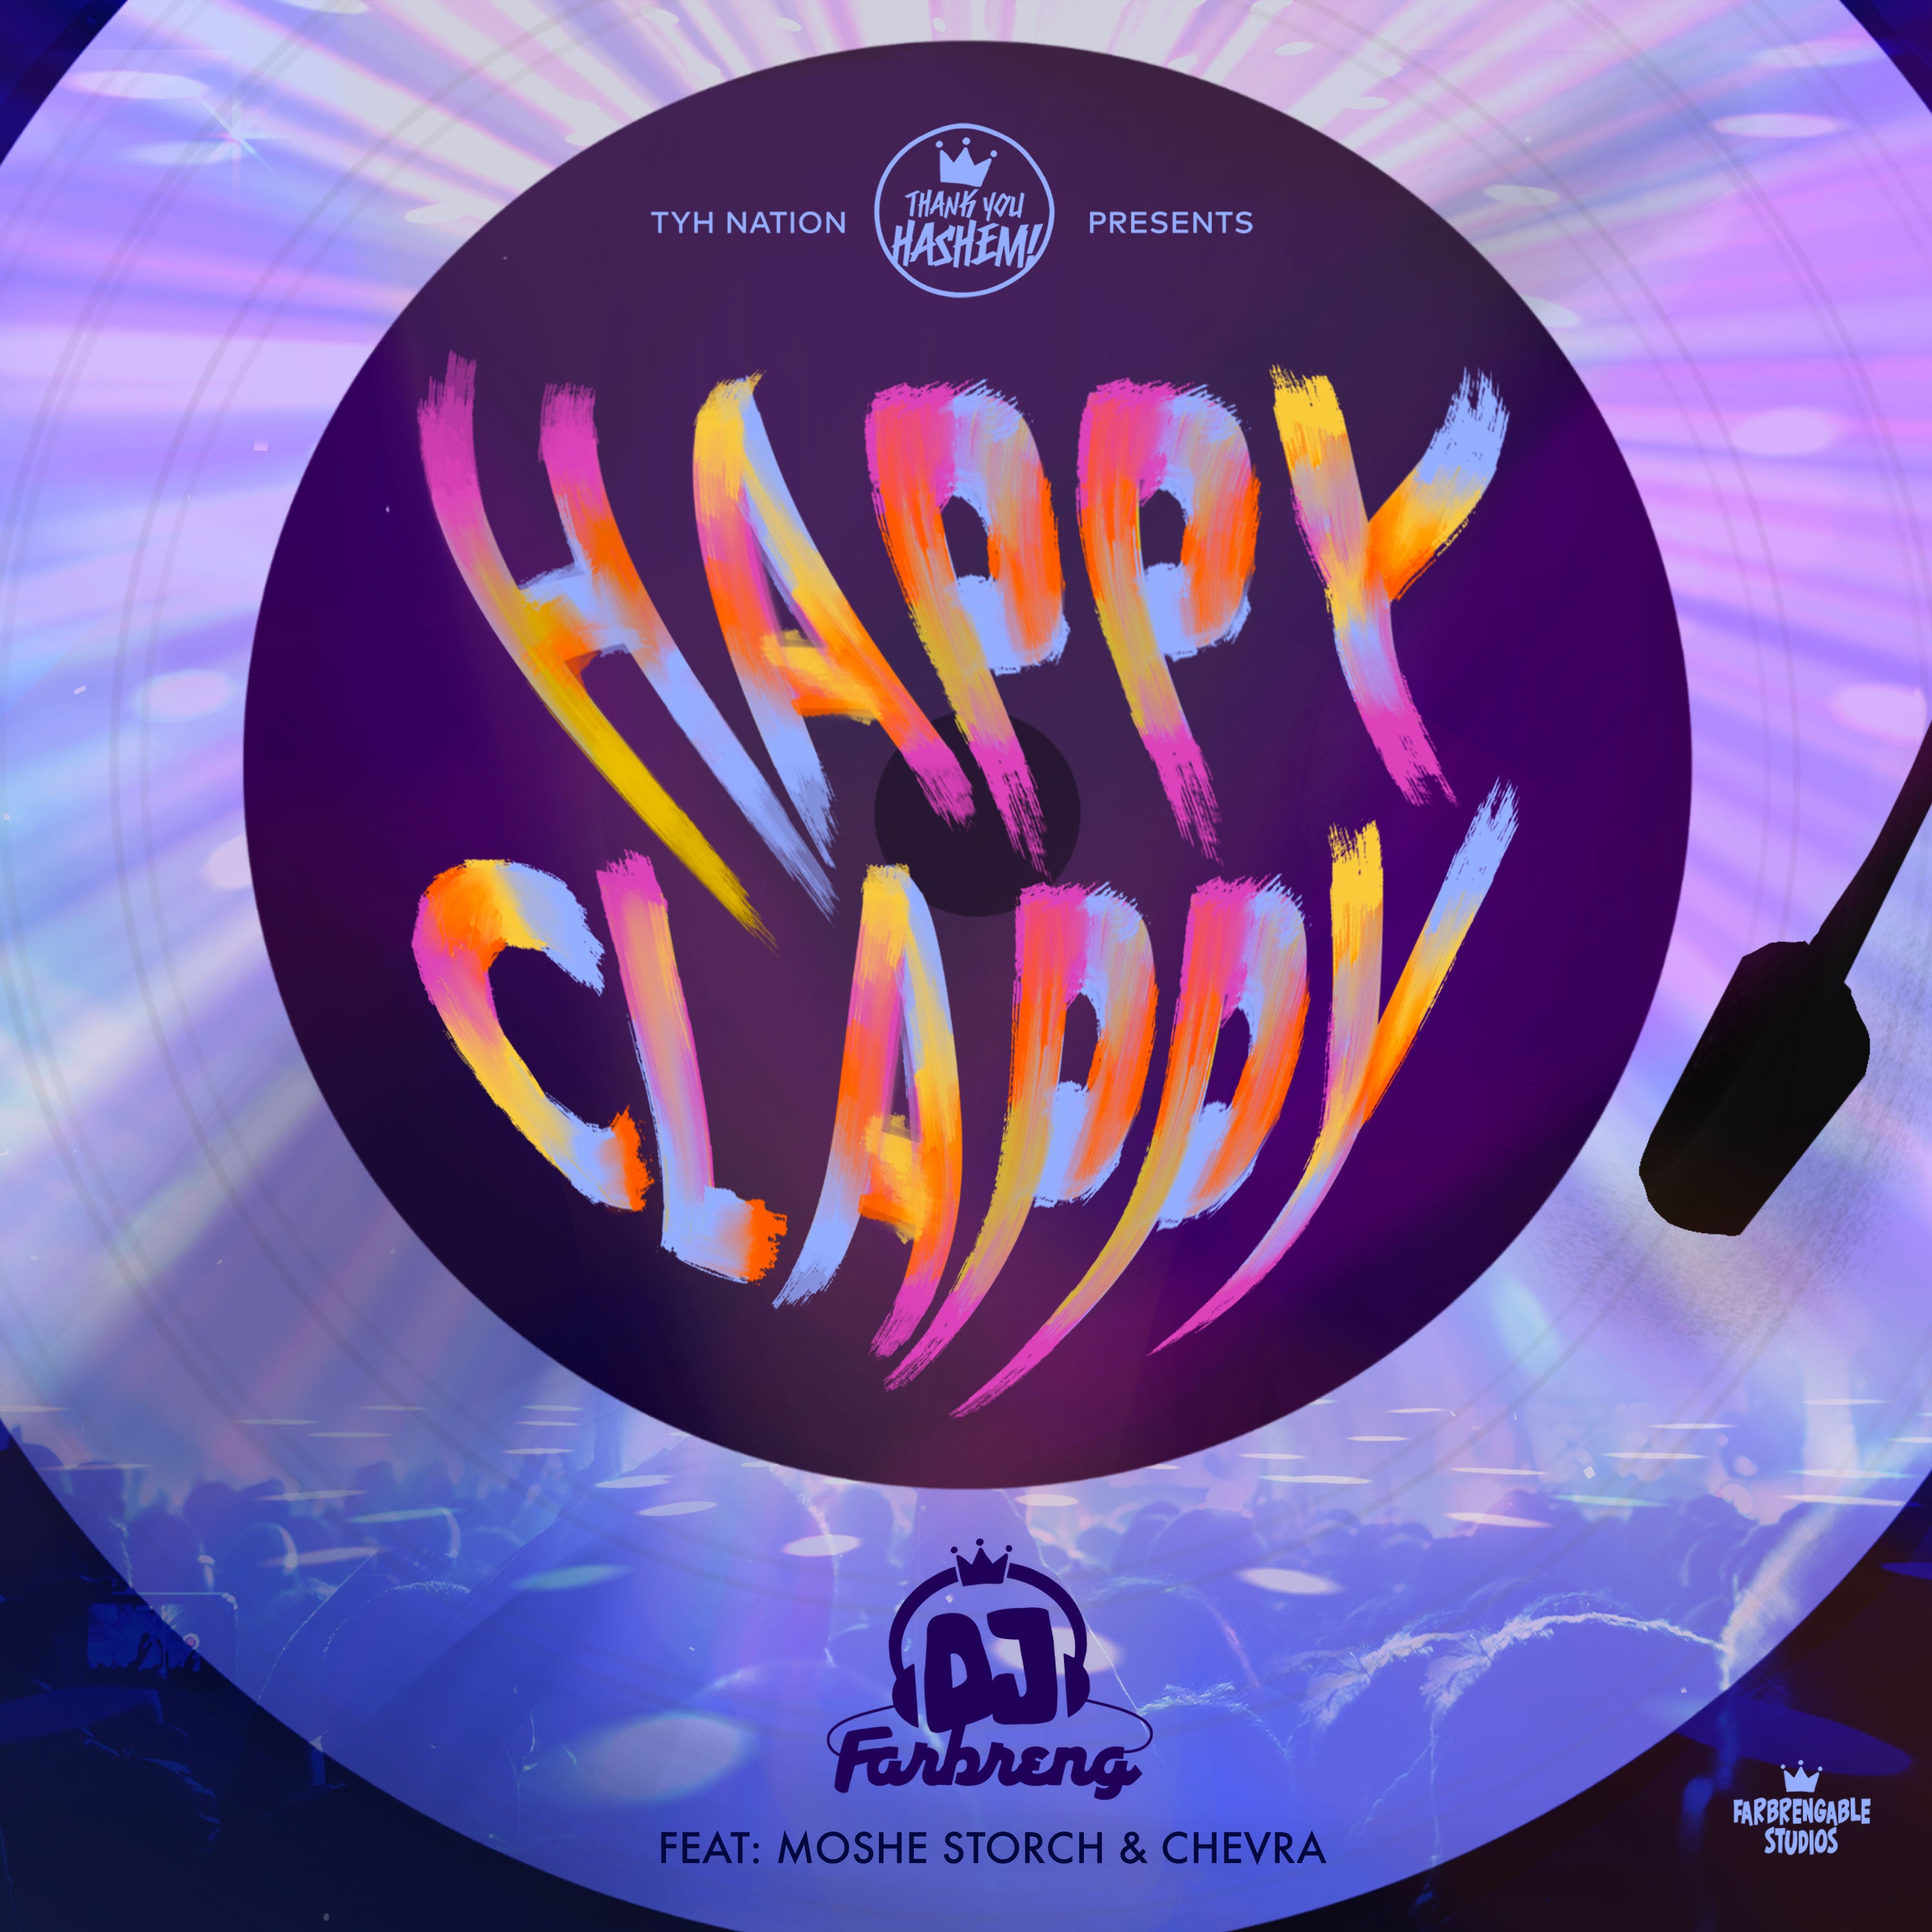 Tyh Nation, DJ Farbreng & Moshe Storch - Happy Clappy